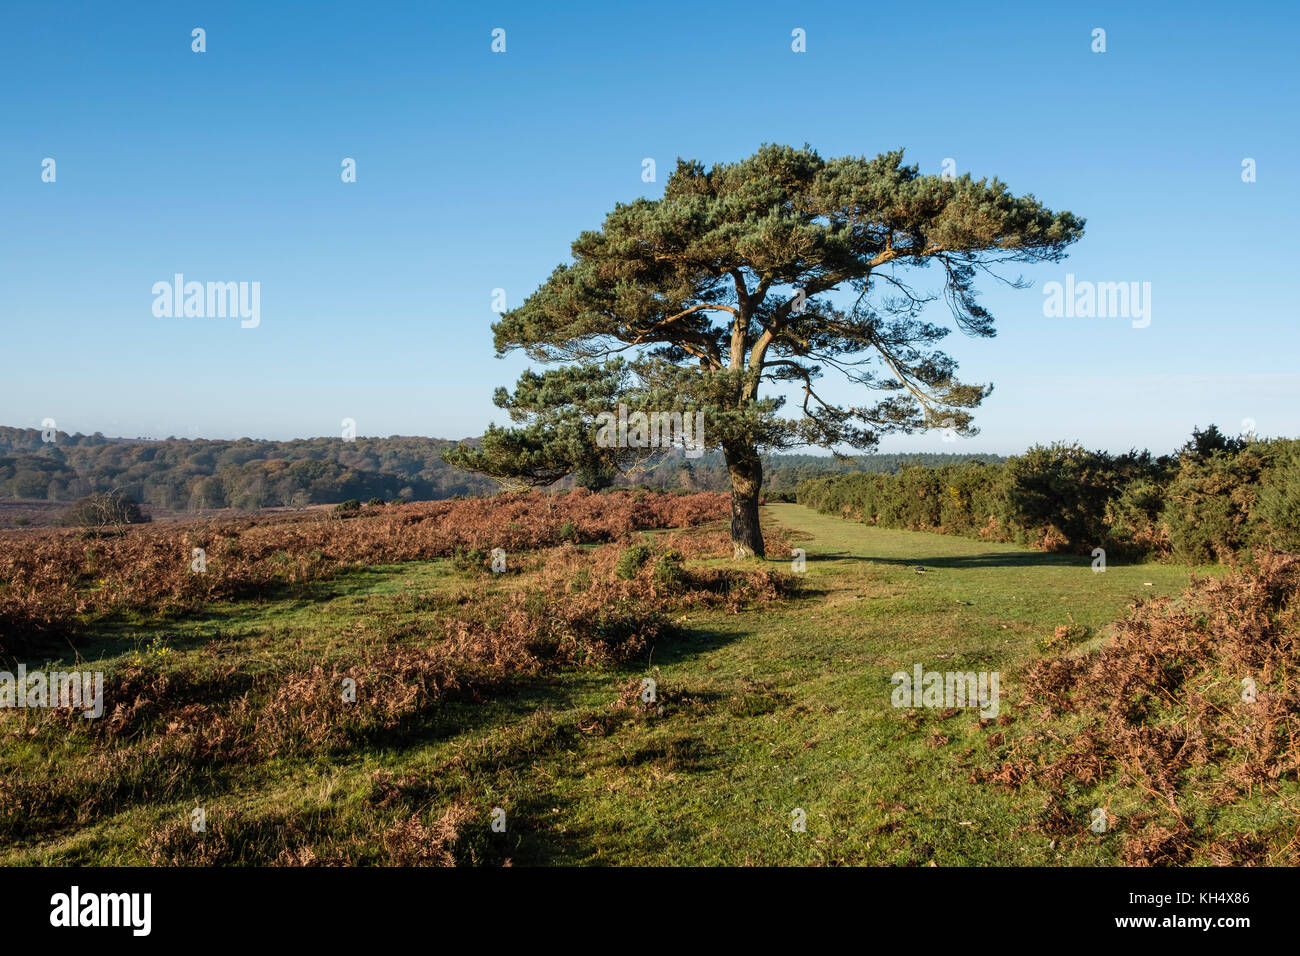 A lone pine tree in the New Forest National Park on heathland in autumn with a path through heather, Hampshire, England, UK Stock Photo